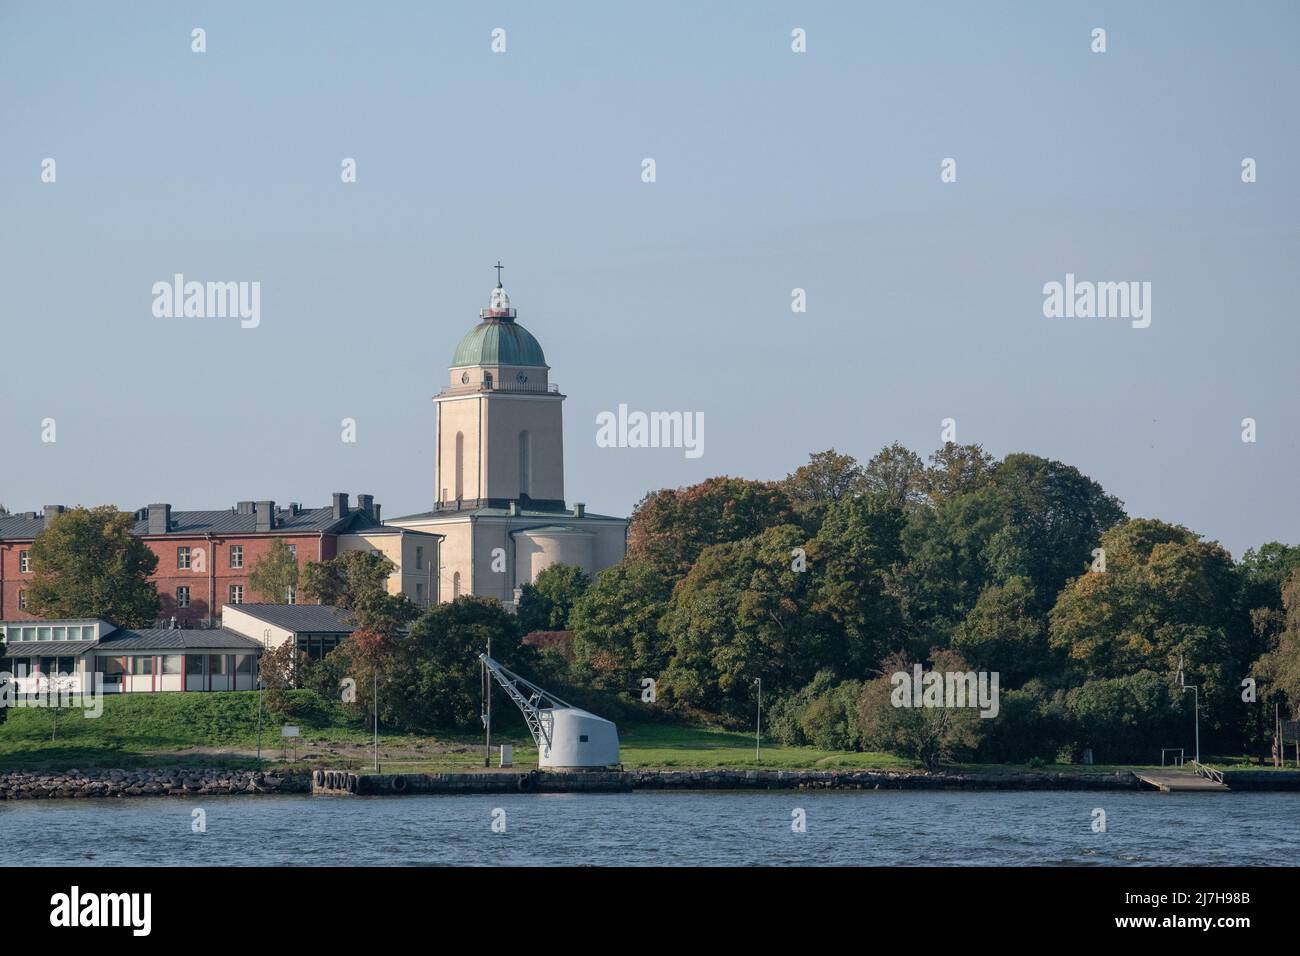 The sea fortress of Suomenlinna is an interconnected island district of Helsinki located in the Gulf of Finland. Stock Photo